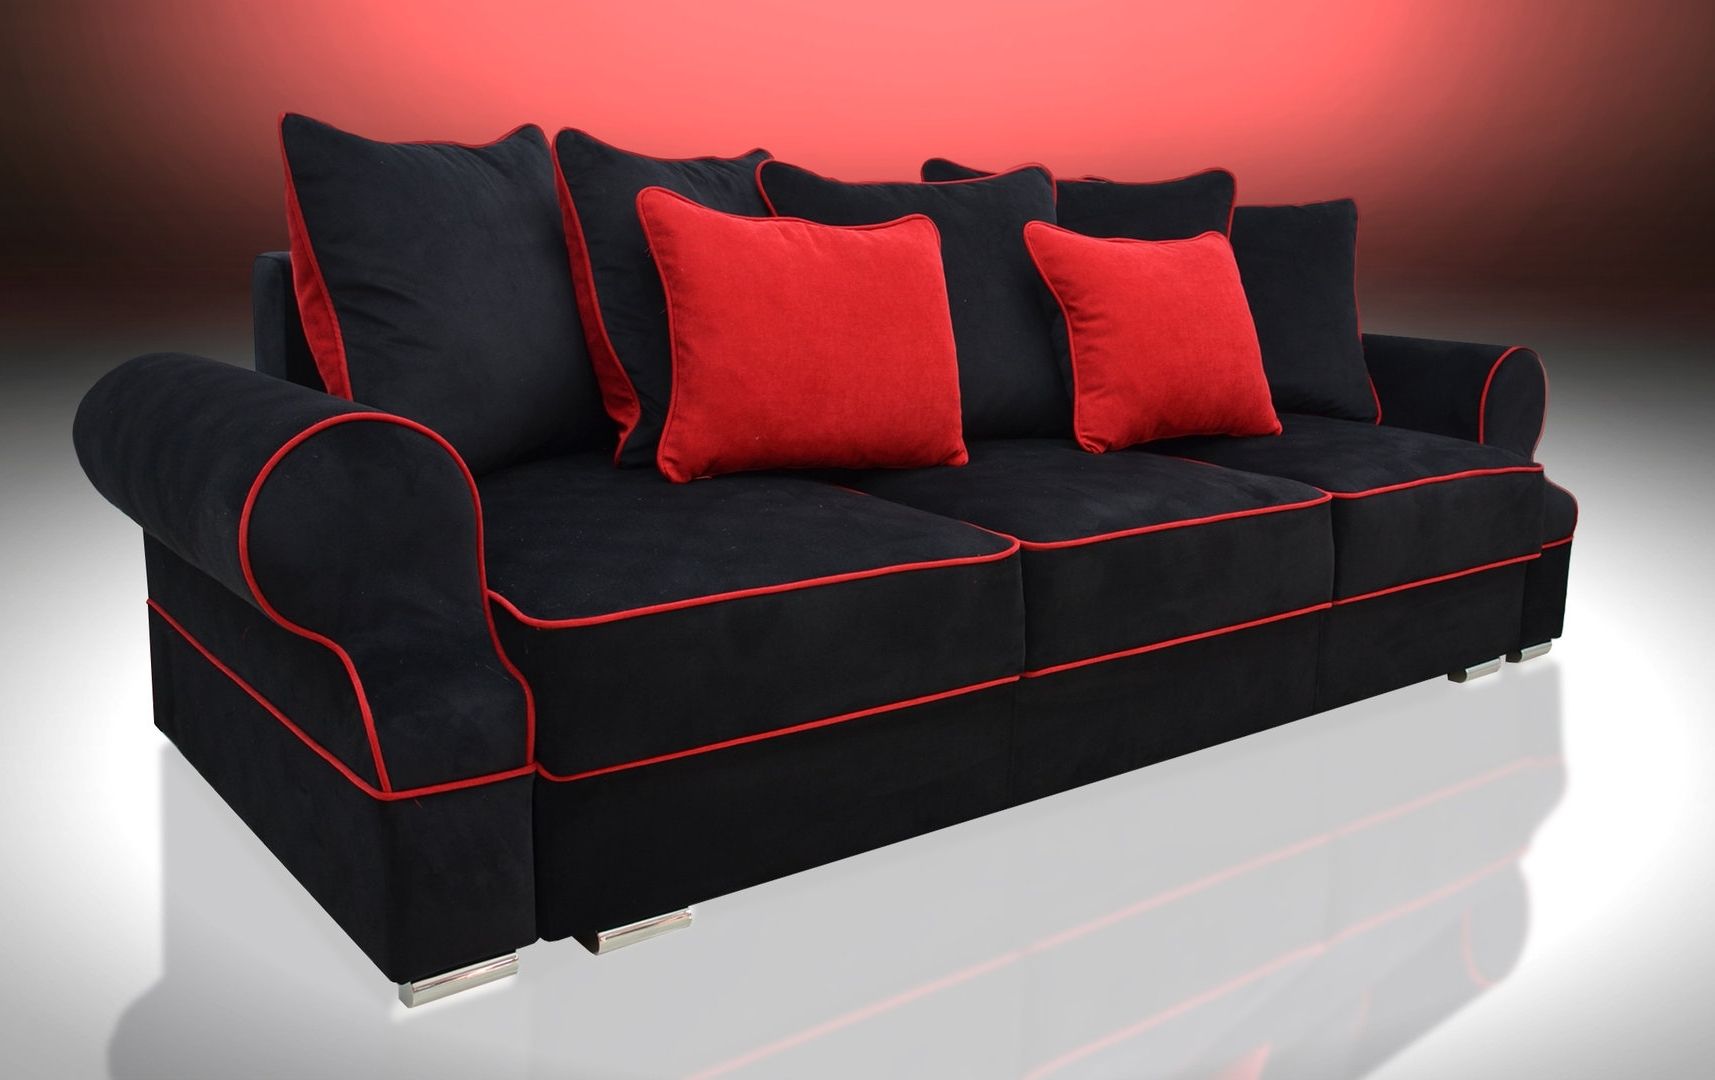 Newest Red And Black Sofas Inside Bed 3 Seater Royal, Black/red Velvet Fabric (View 8 of 15)